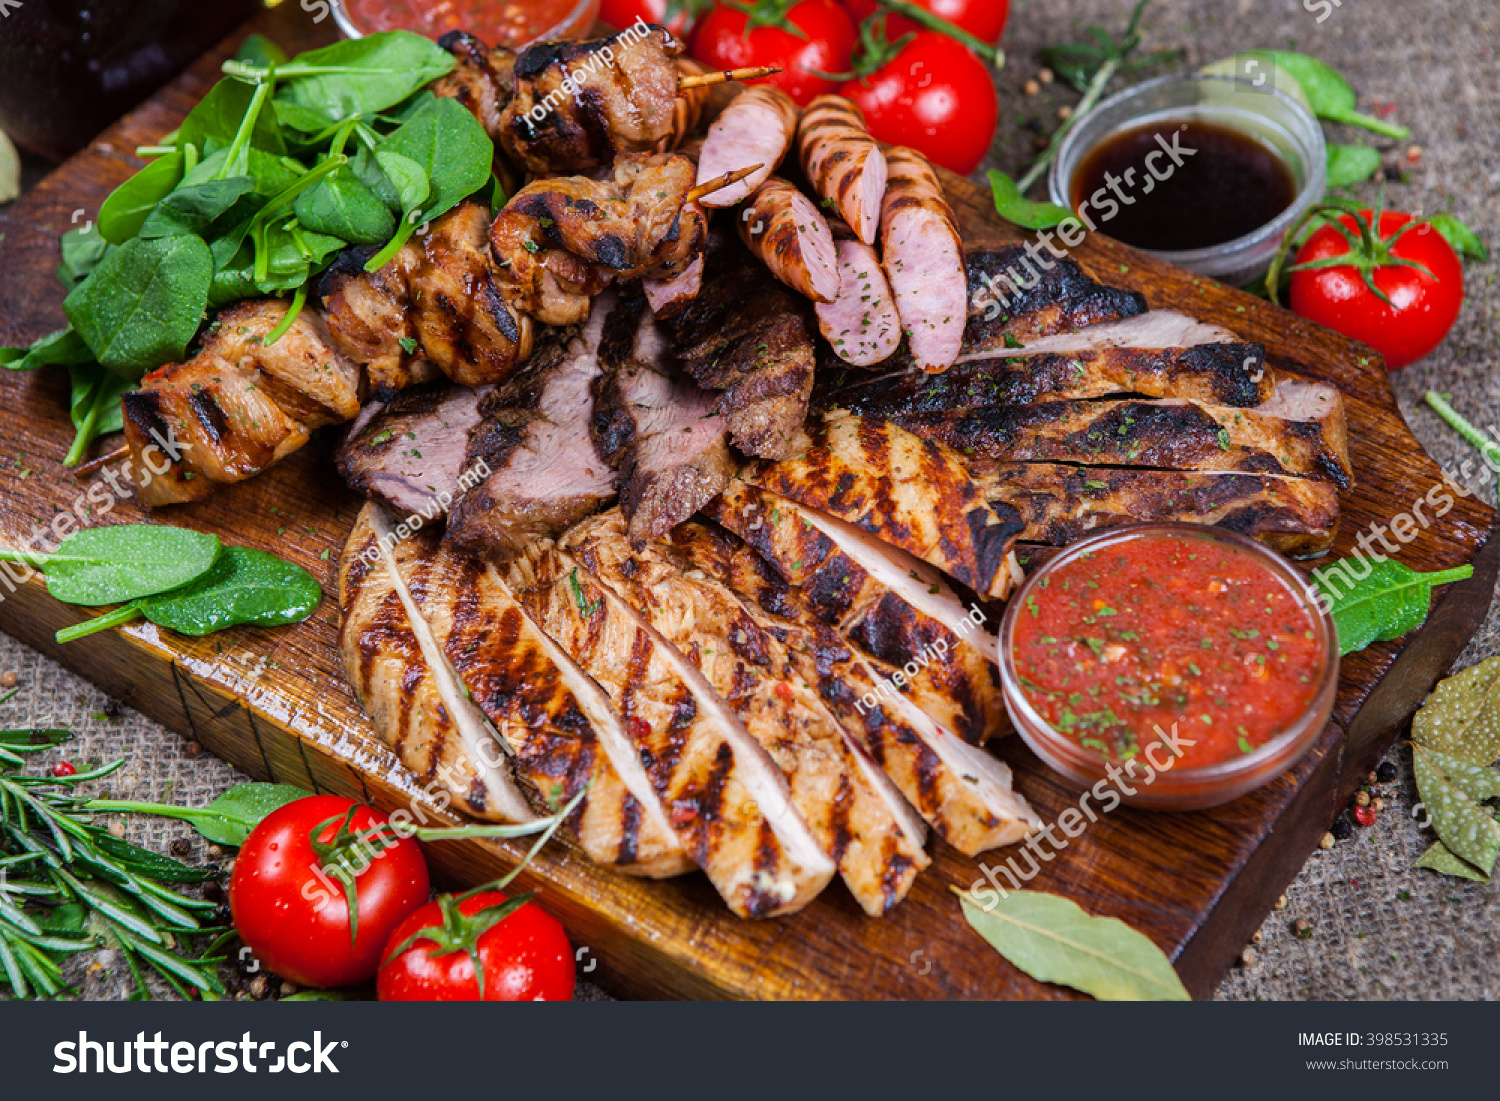 Mixed Grilled Meat Platter Assorted Delicious Stock Photo 398531335 ...